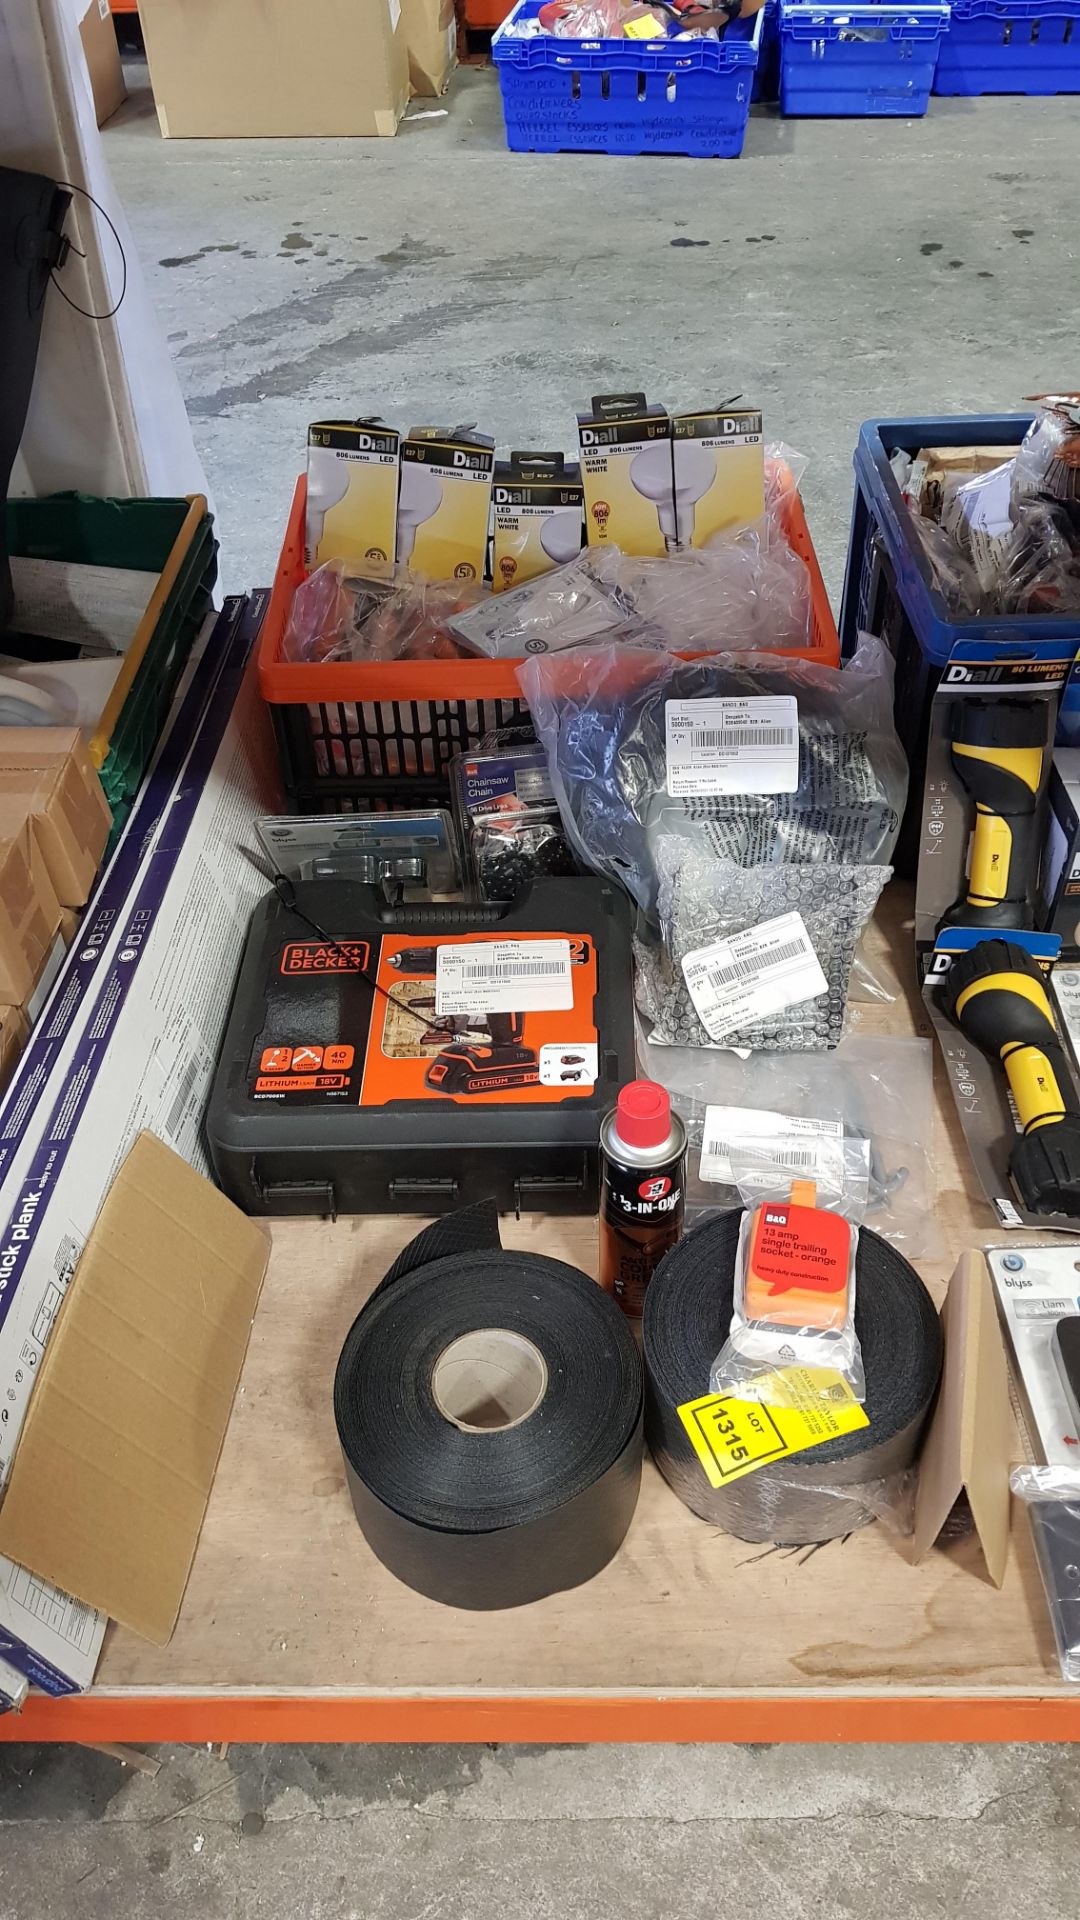 QUARTER BAY CONTAINING ASSORTED BRAND NEW HARDWARE/DIY LOT CONTAINING BLACK AND DECKER DRILL,